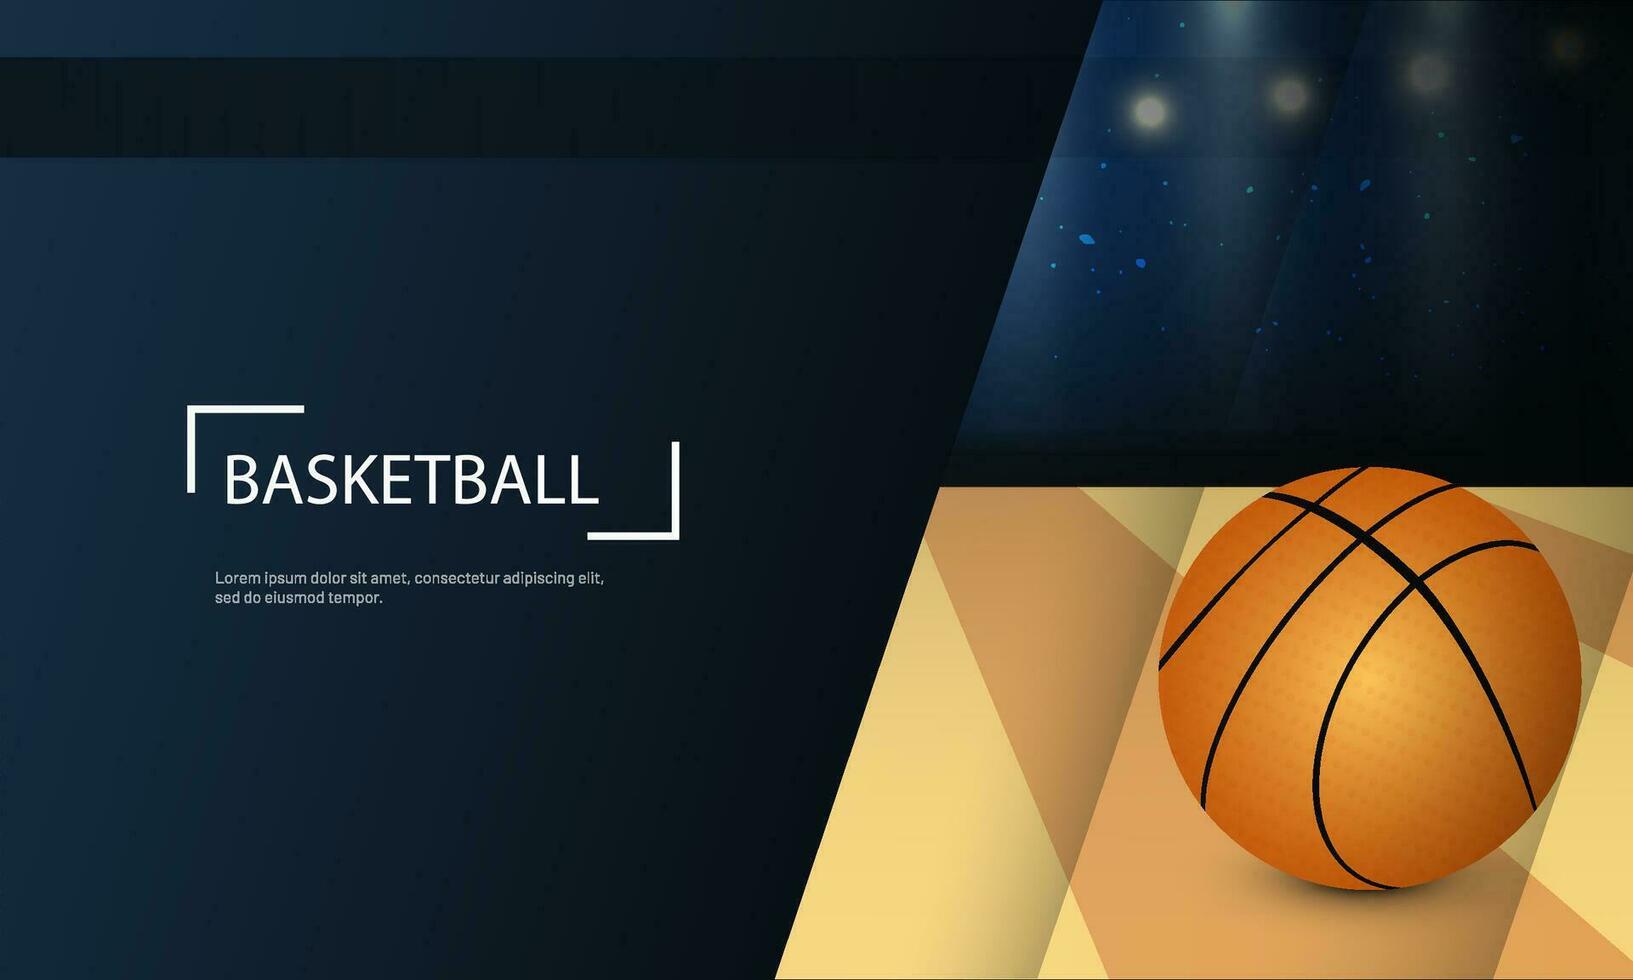 Basketball Tournament Responsive Template or Website Banner Design with Realistic Basketball on Shiny Abstract Background. vector